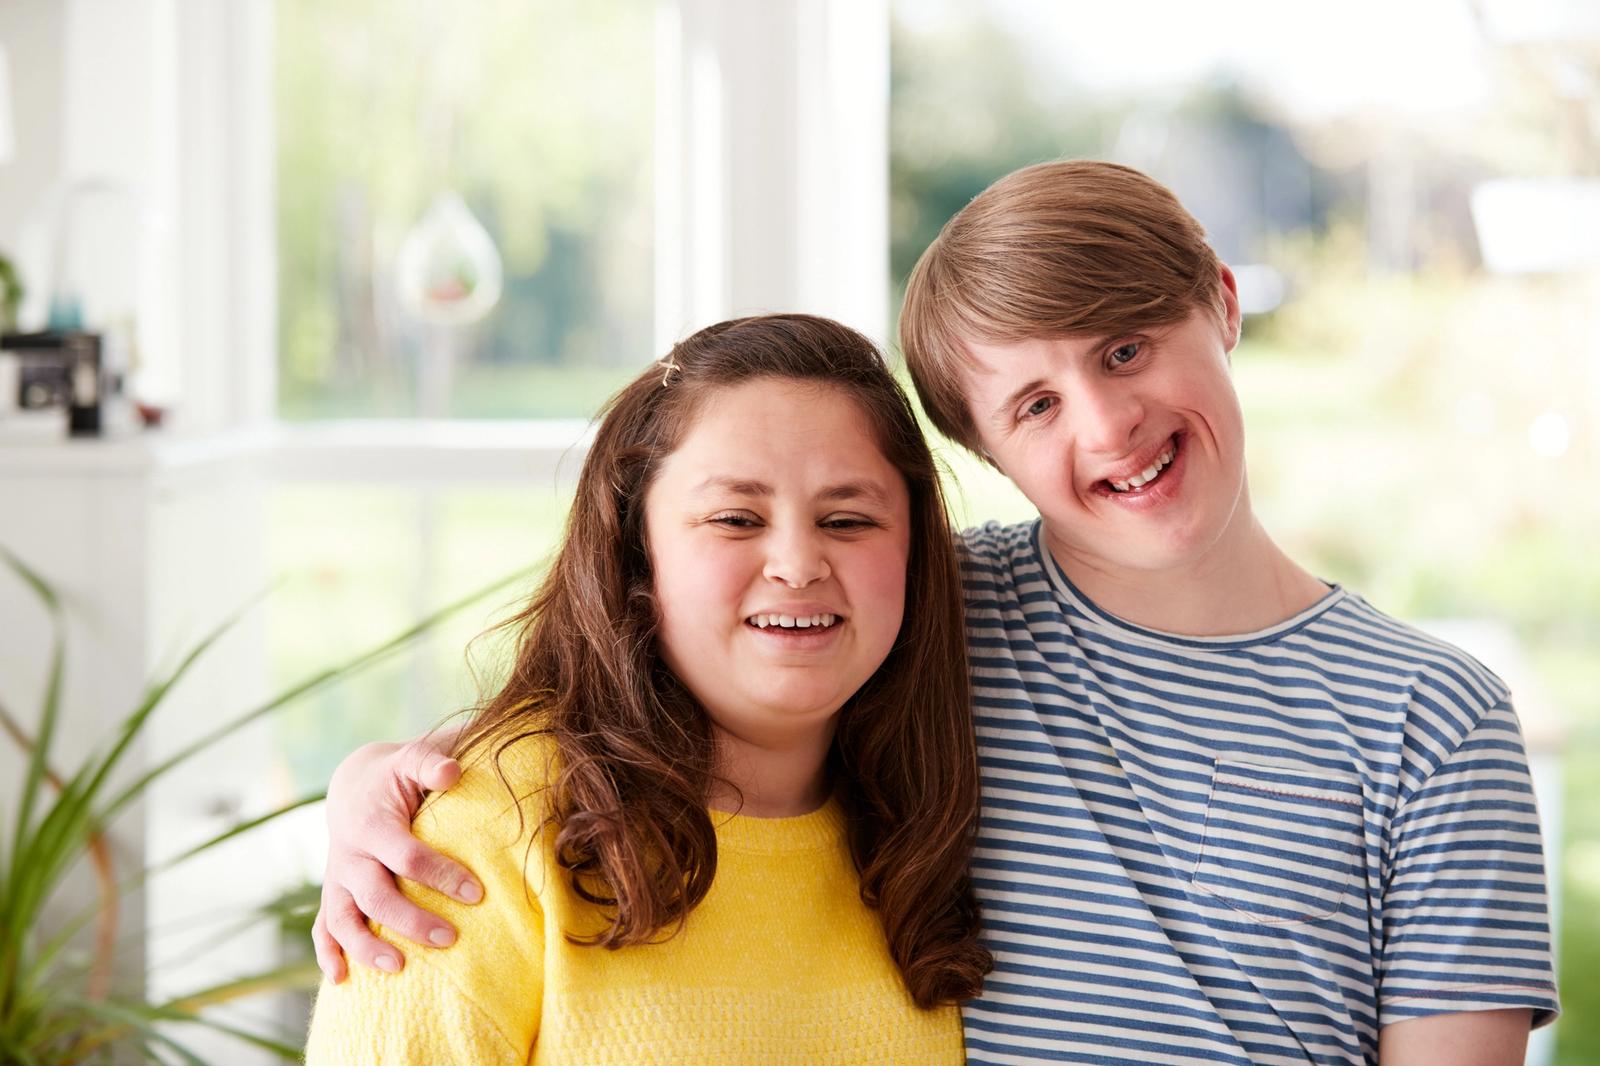 Two individuals with Down syndrome